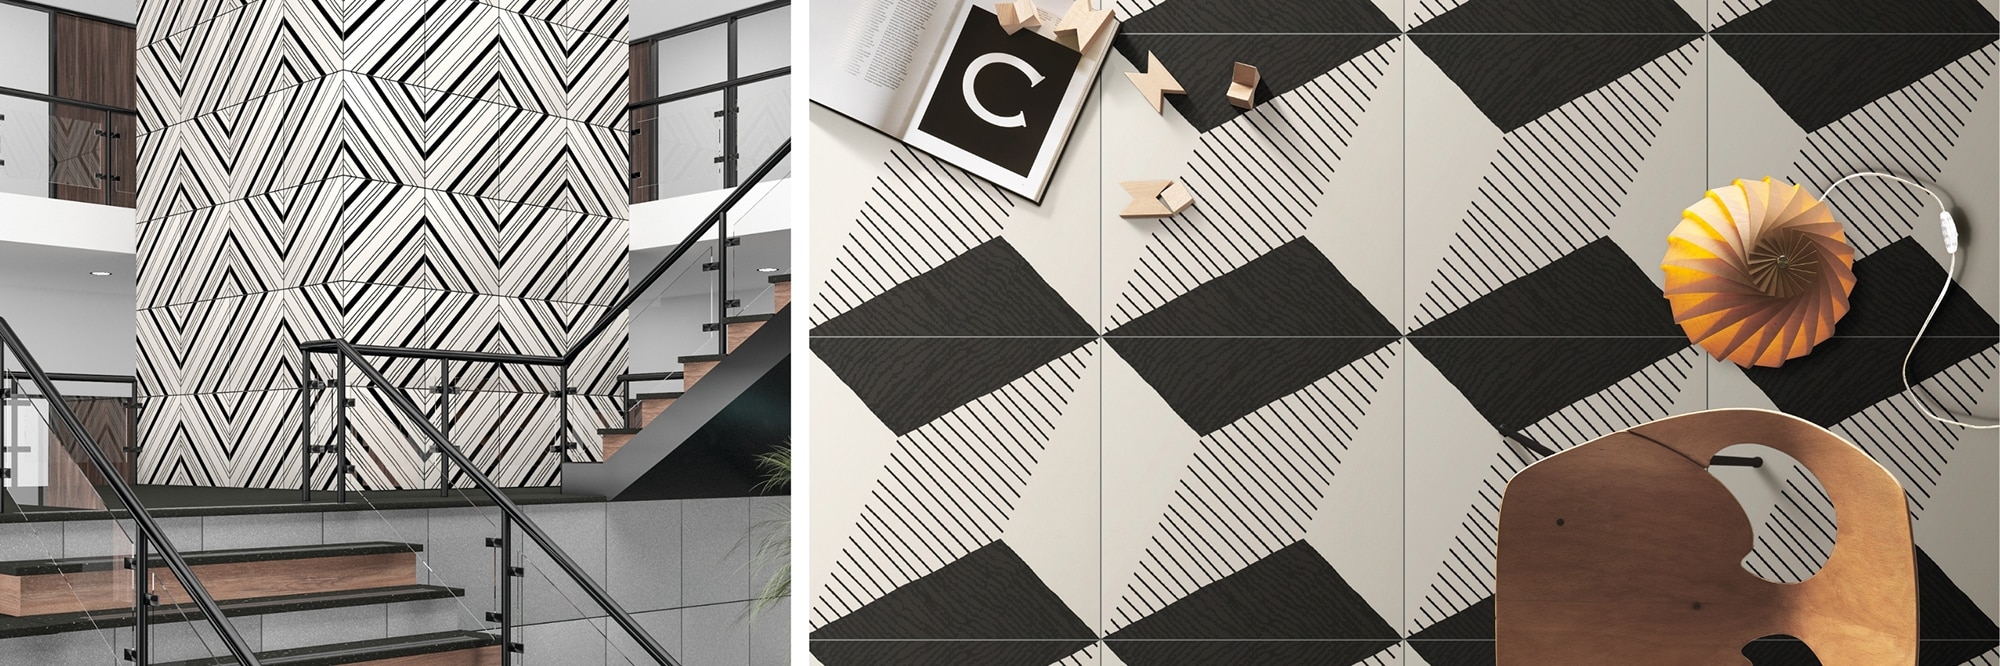 Collage of an office atrium staircase with center column covered with white, black, and gray geometric tile, and wooden chair on black and white geometric floor tile.